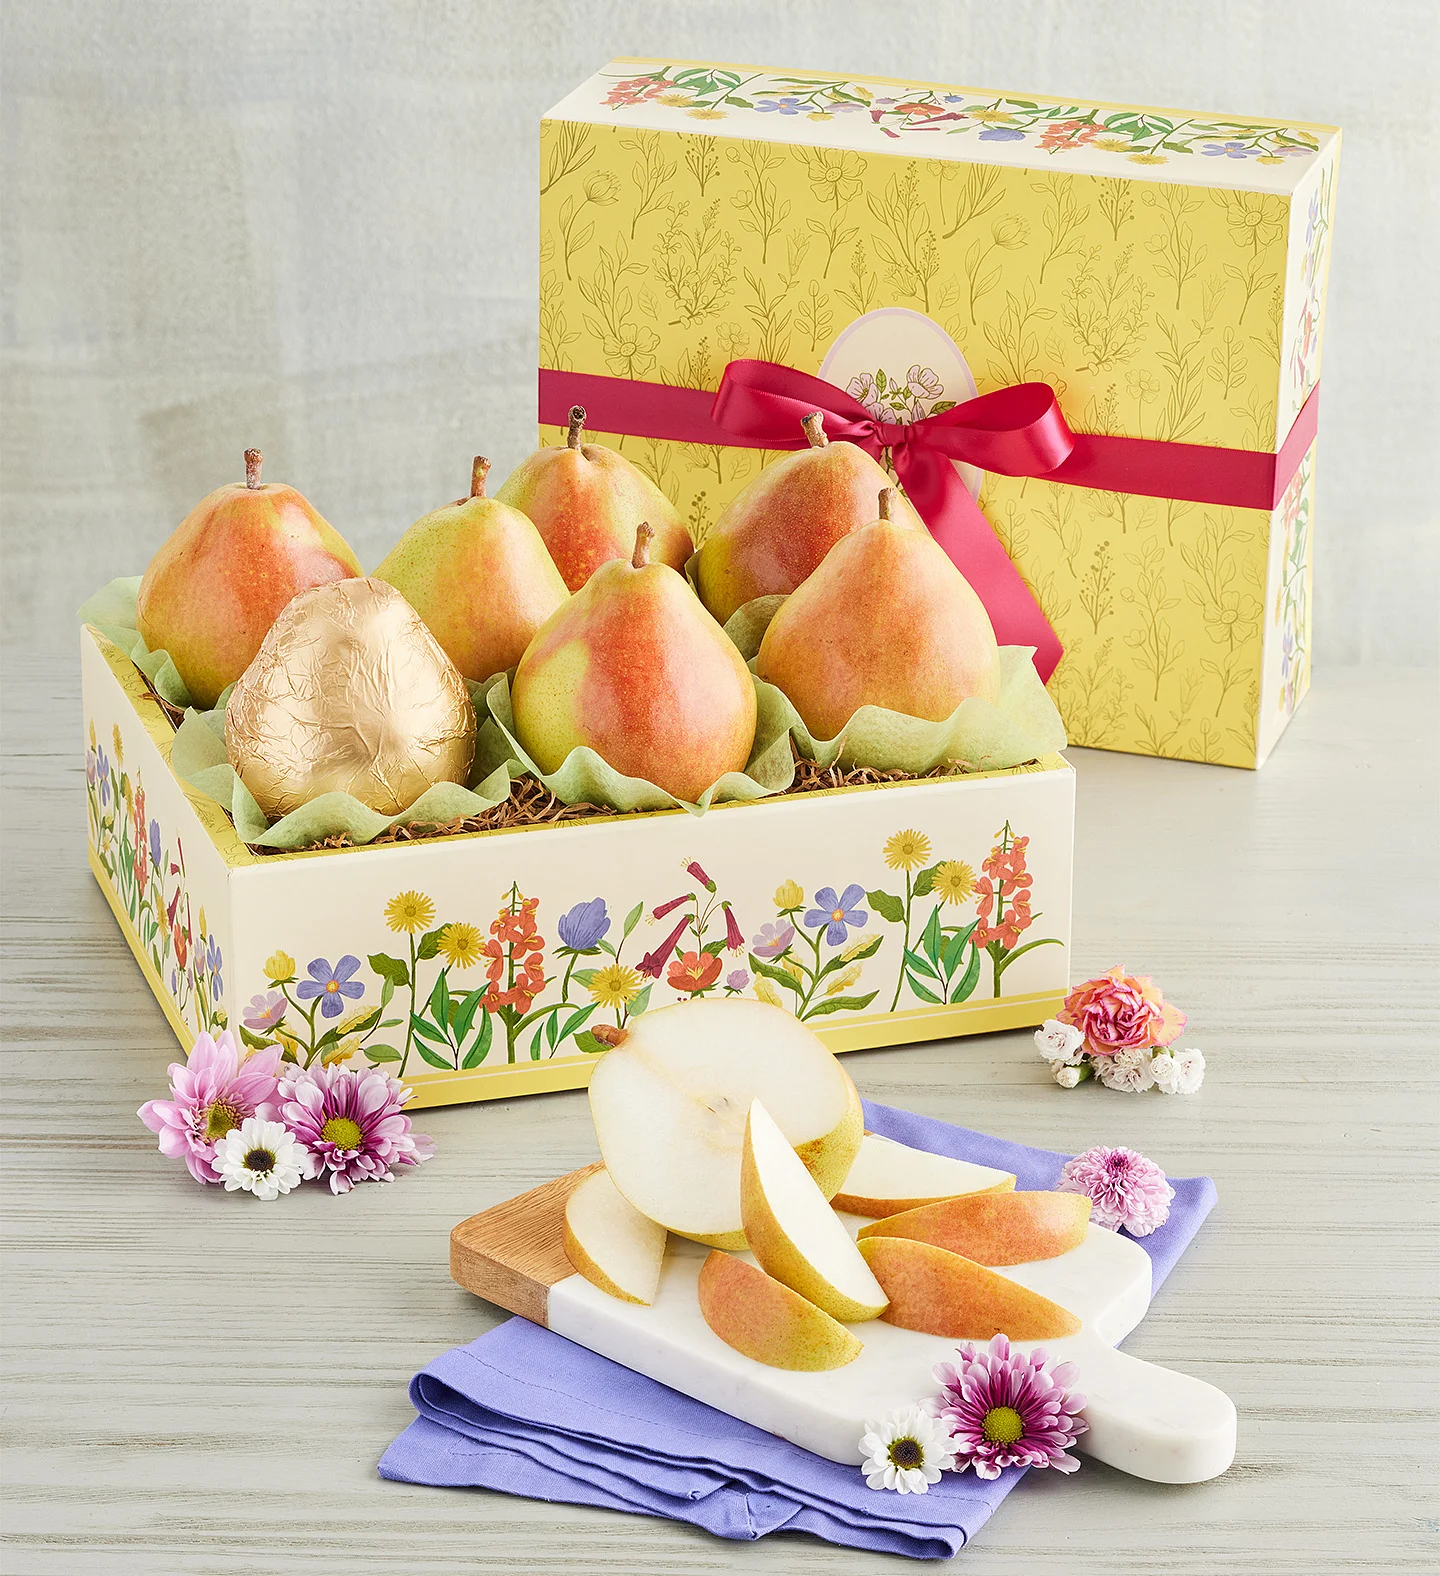 last minute gift ideas for mom royal verano pears mothers day gift box